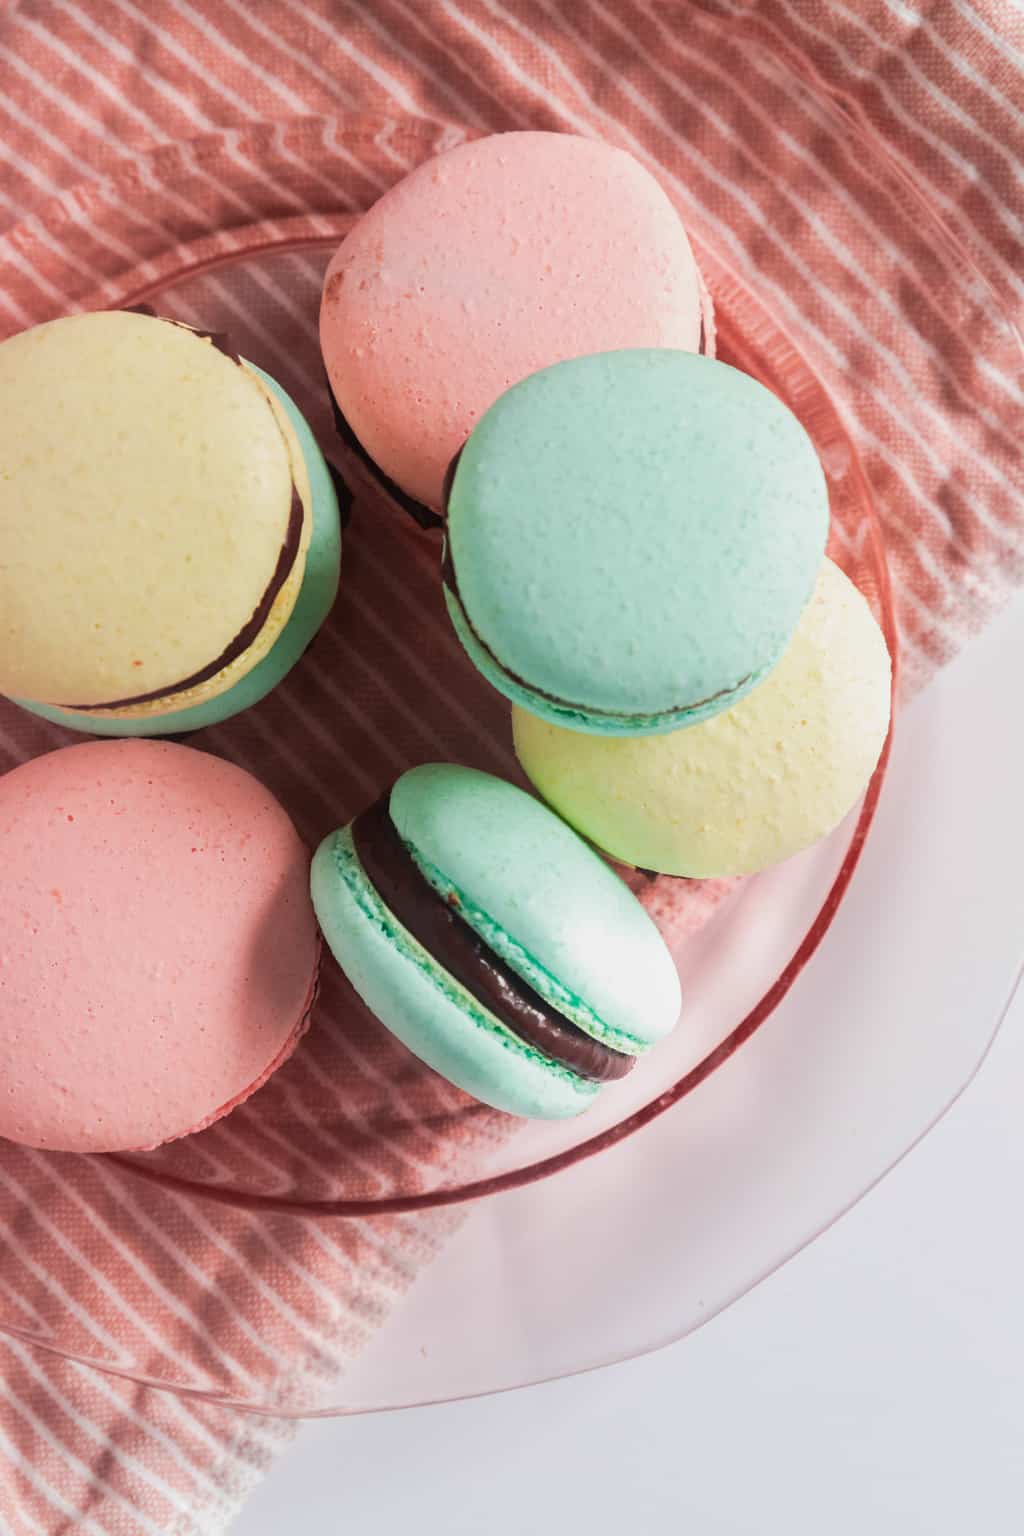 A photo of Italian Macarons made by Sugar and Cloth